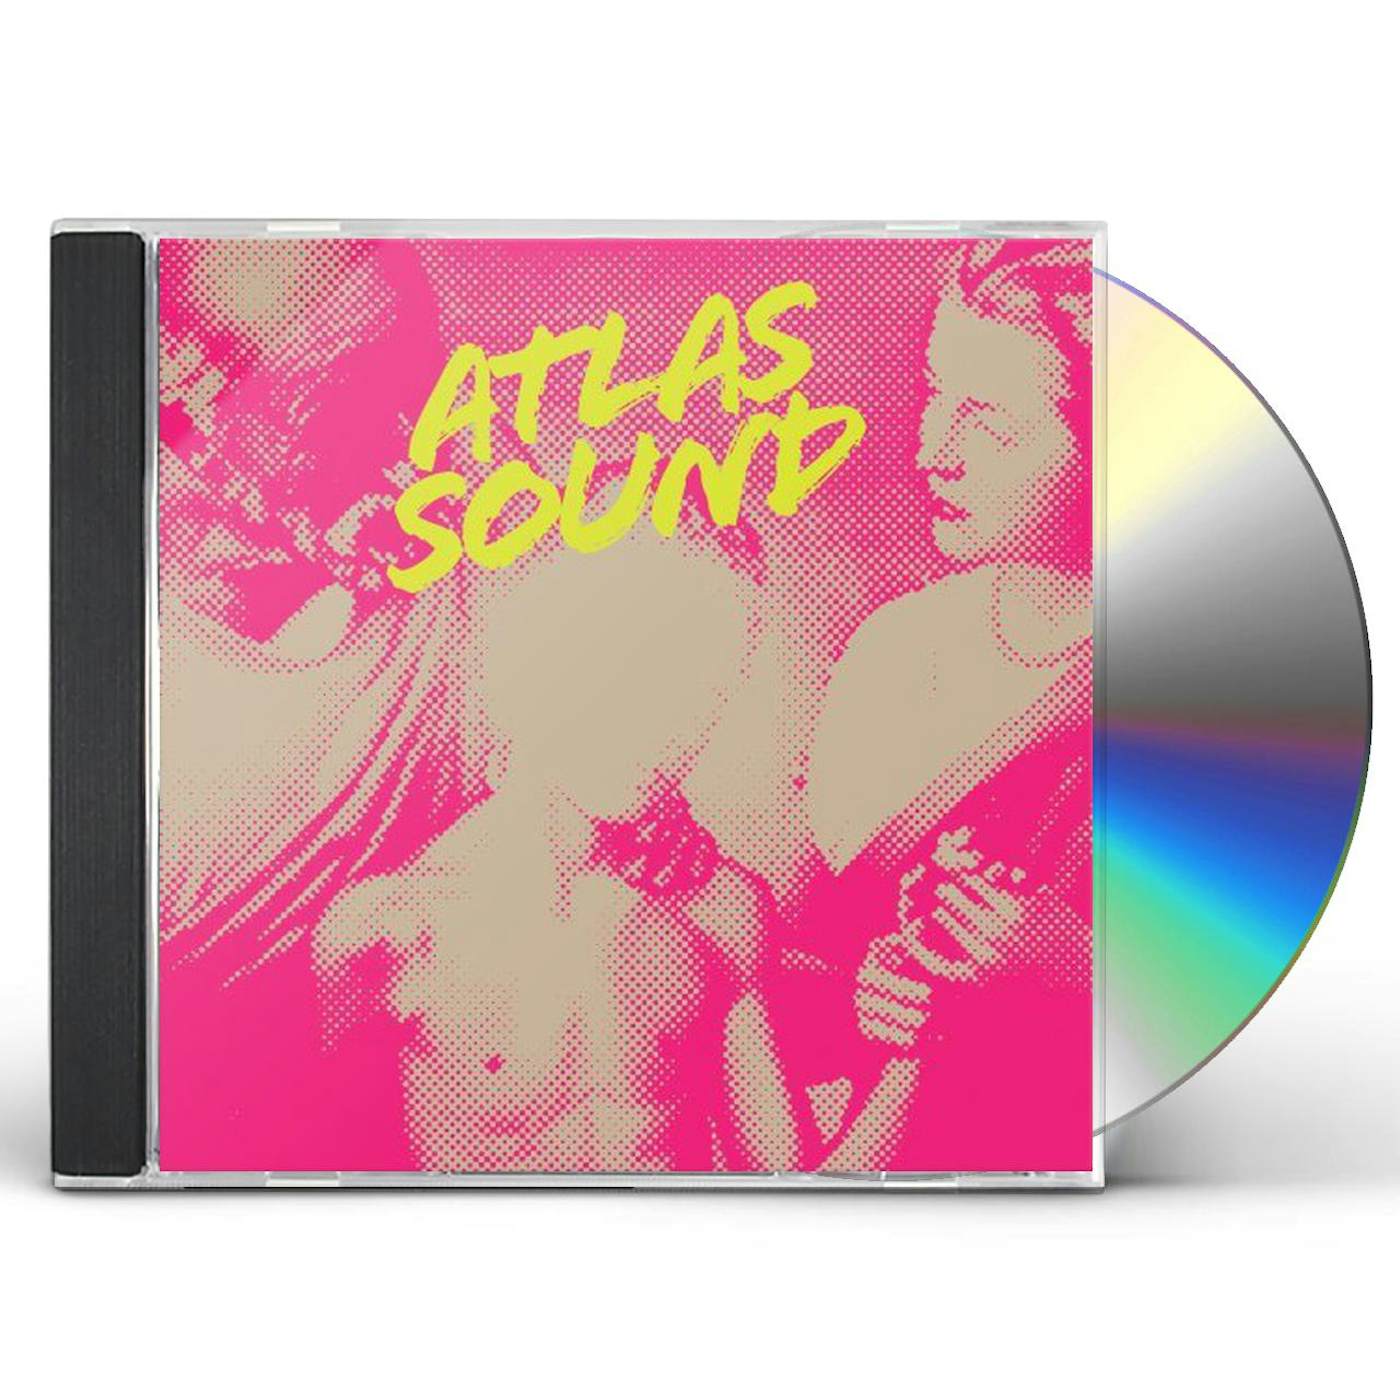 Atlas Sound LET THE BLIND LEAD THOSE WHO CAN SEE BUT CANNOT CD